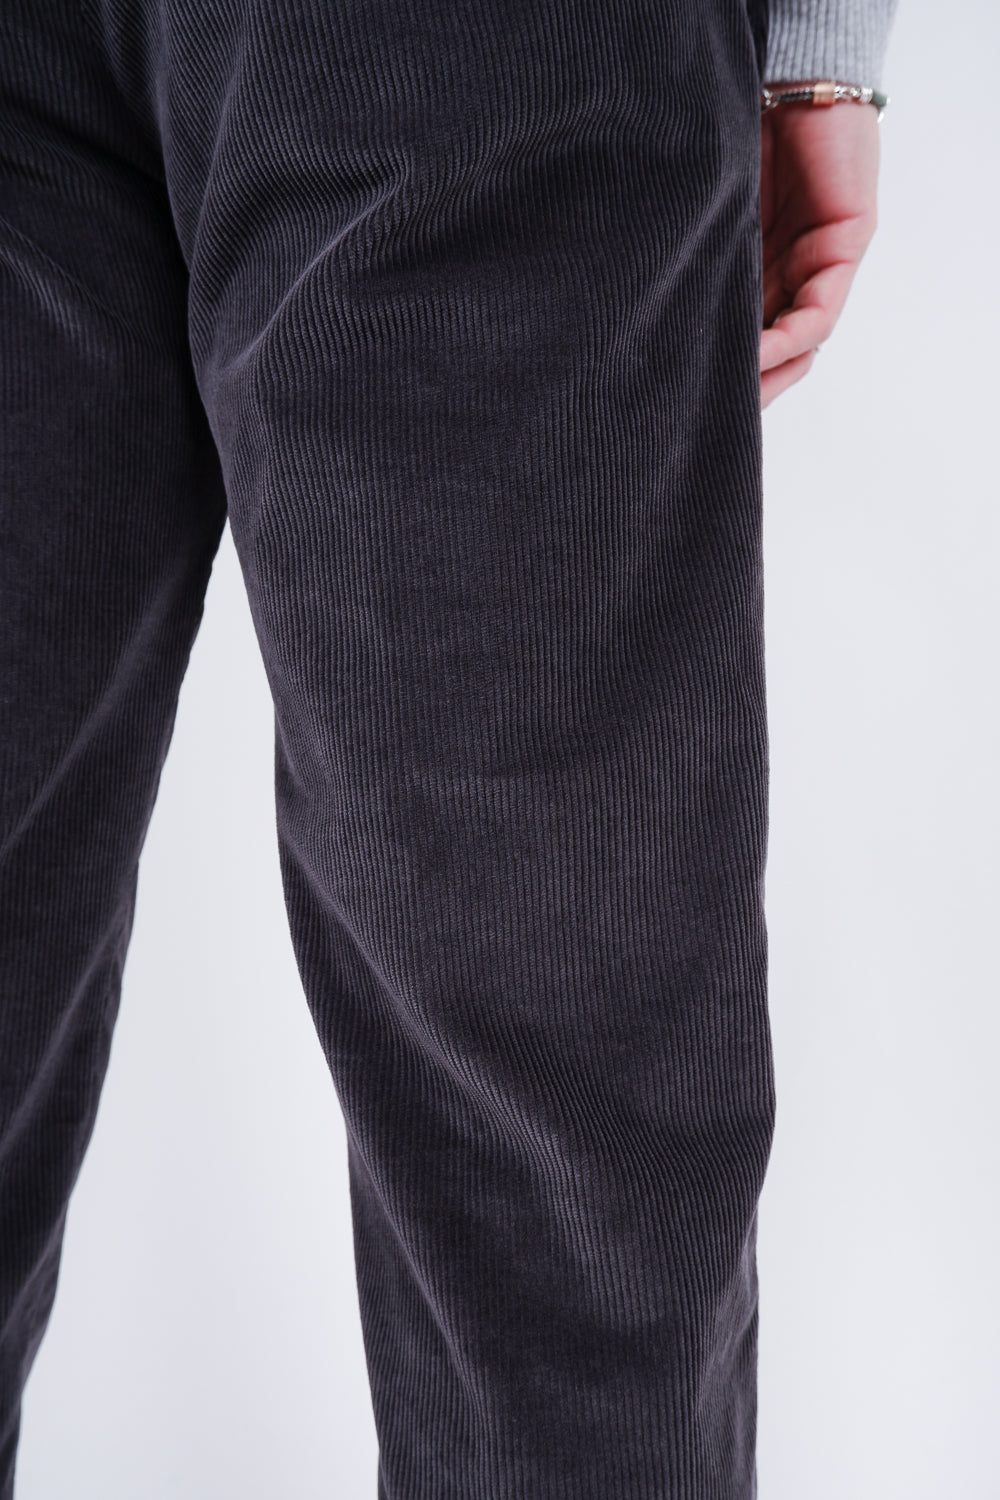 Buy the Briglia Italian Corduroy Trouser in Charcoal at Intro. Spend £50 for free UK delivery. Official stockists. We ship worldwide.